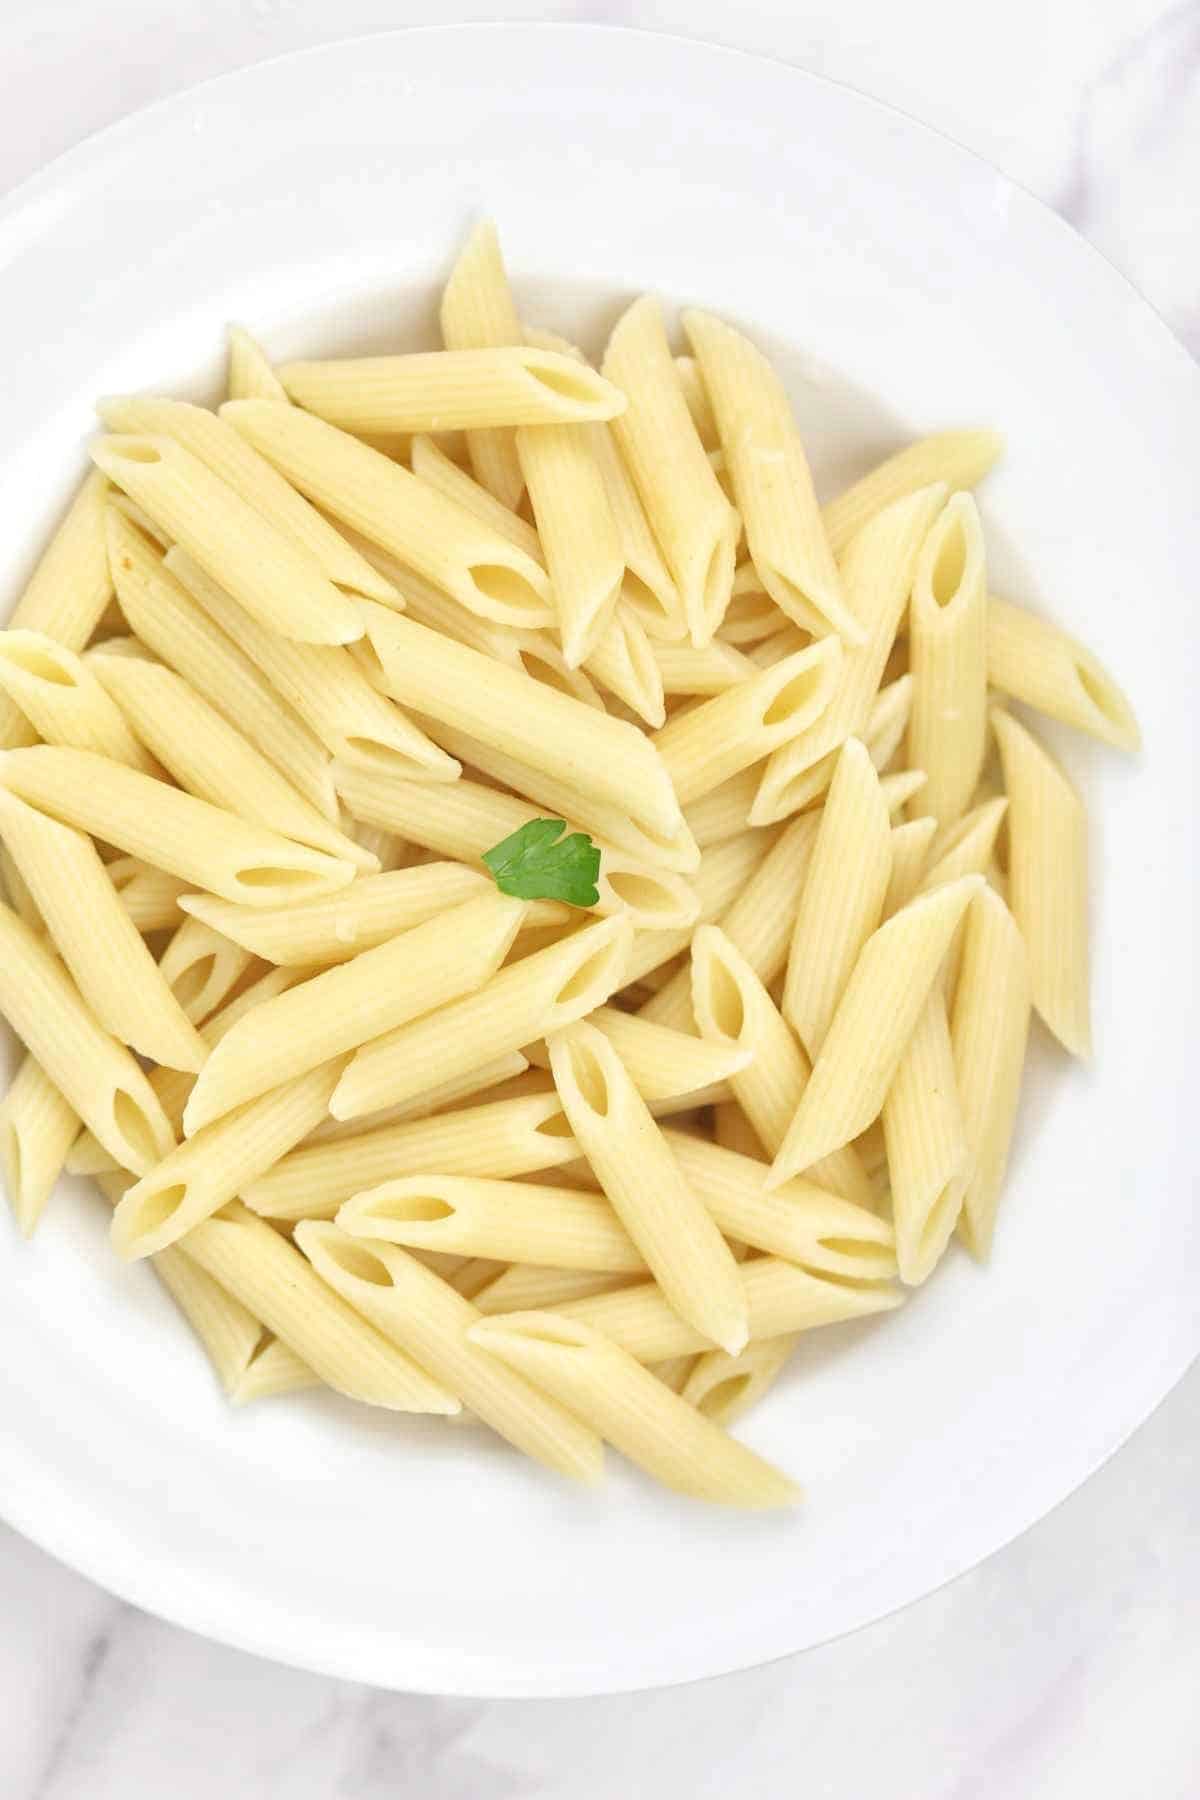 boiled pasta served on a white plate.